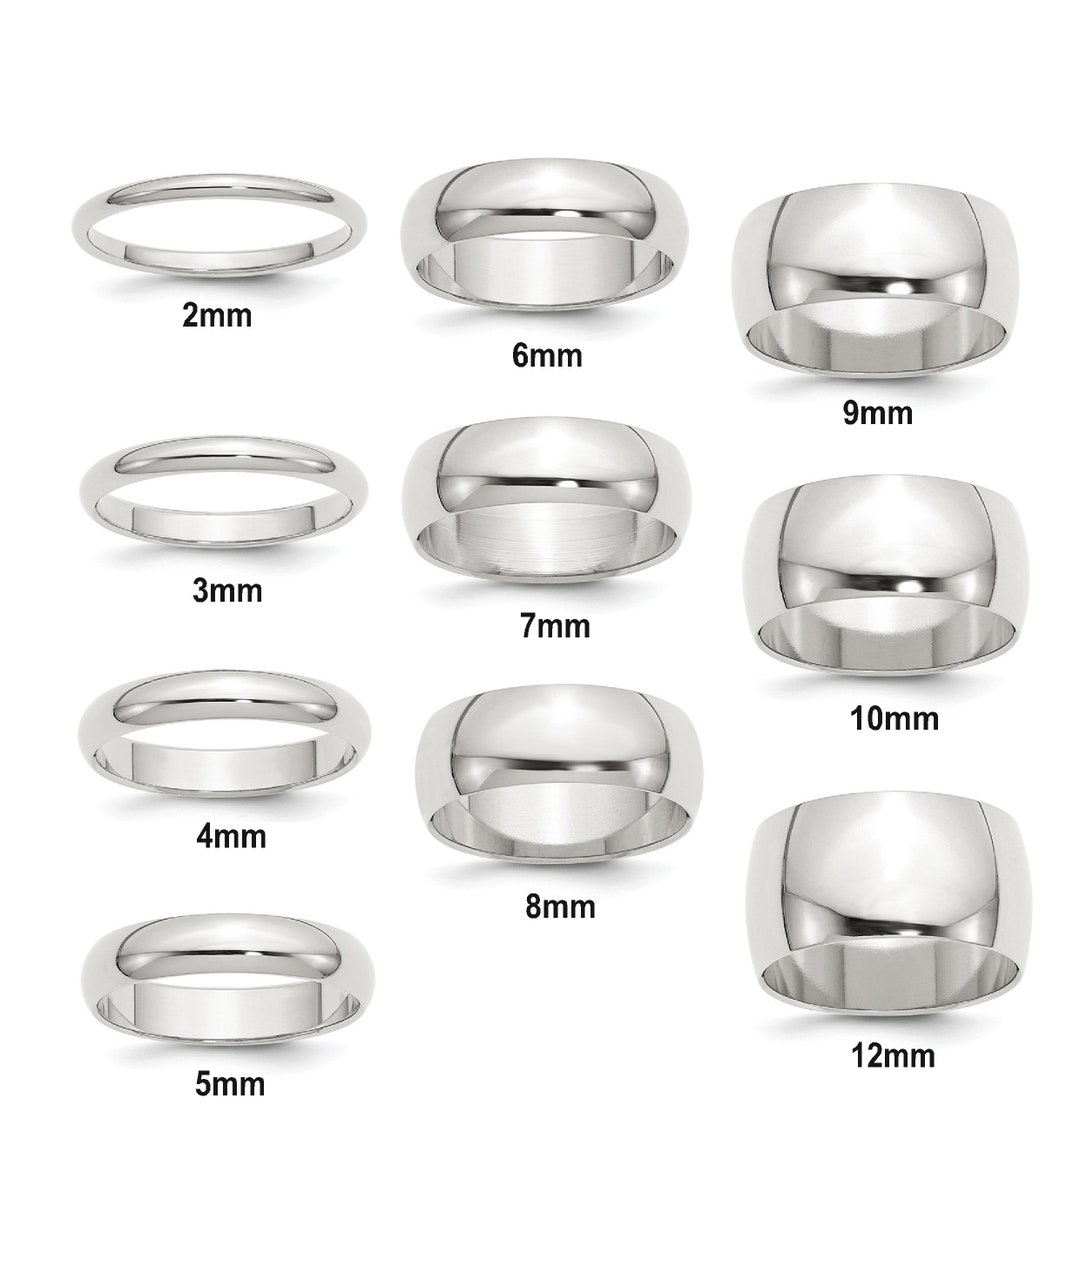 Solid Sterling Silver Half Round Wedding Bands 2mm 3mm 4mm 5mm 6mm